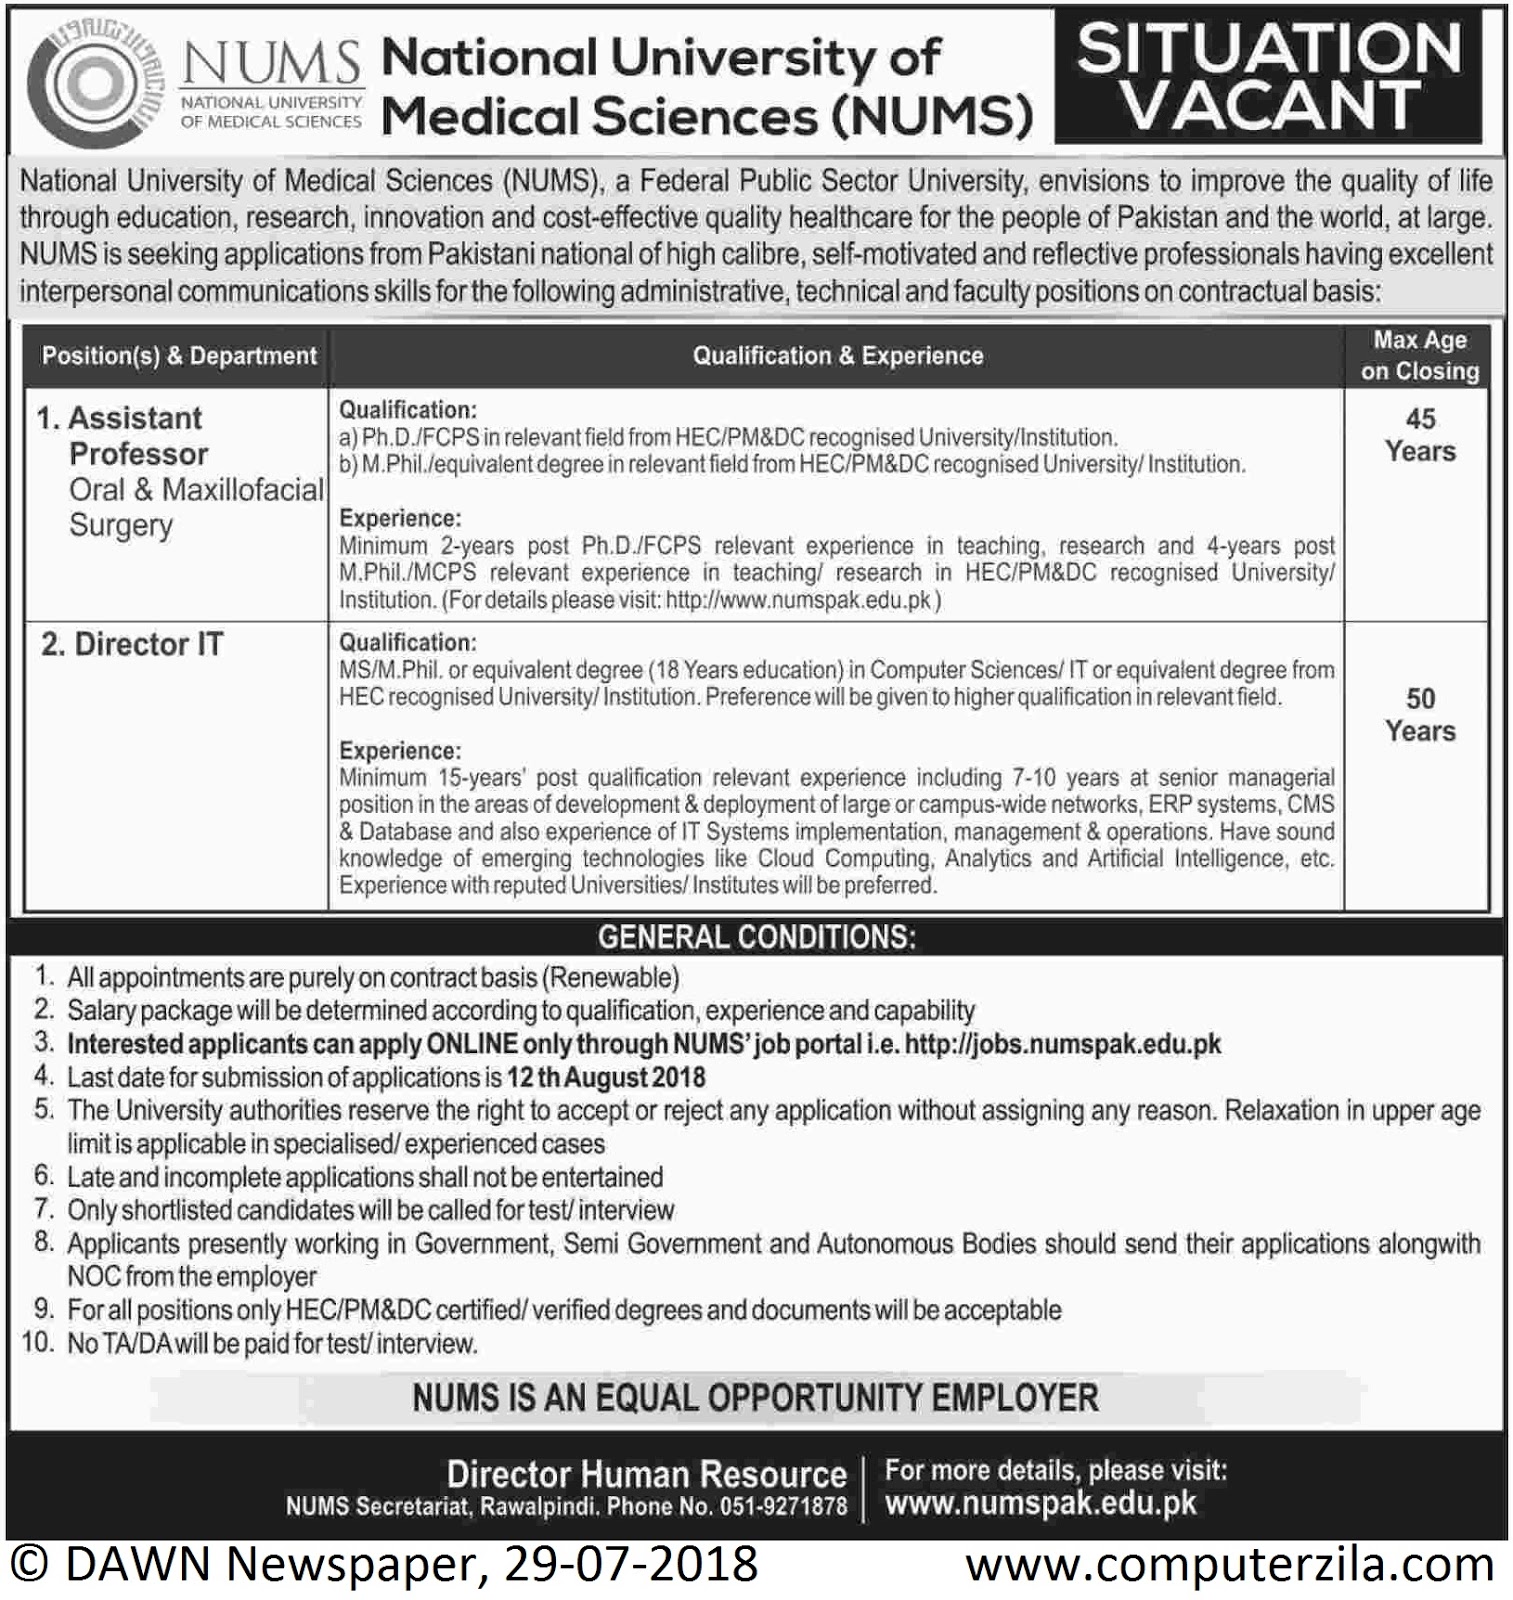 Situation Vacant at National University Of Medical Sciences